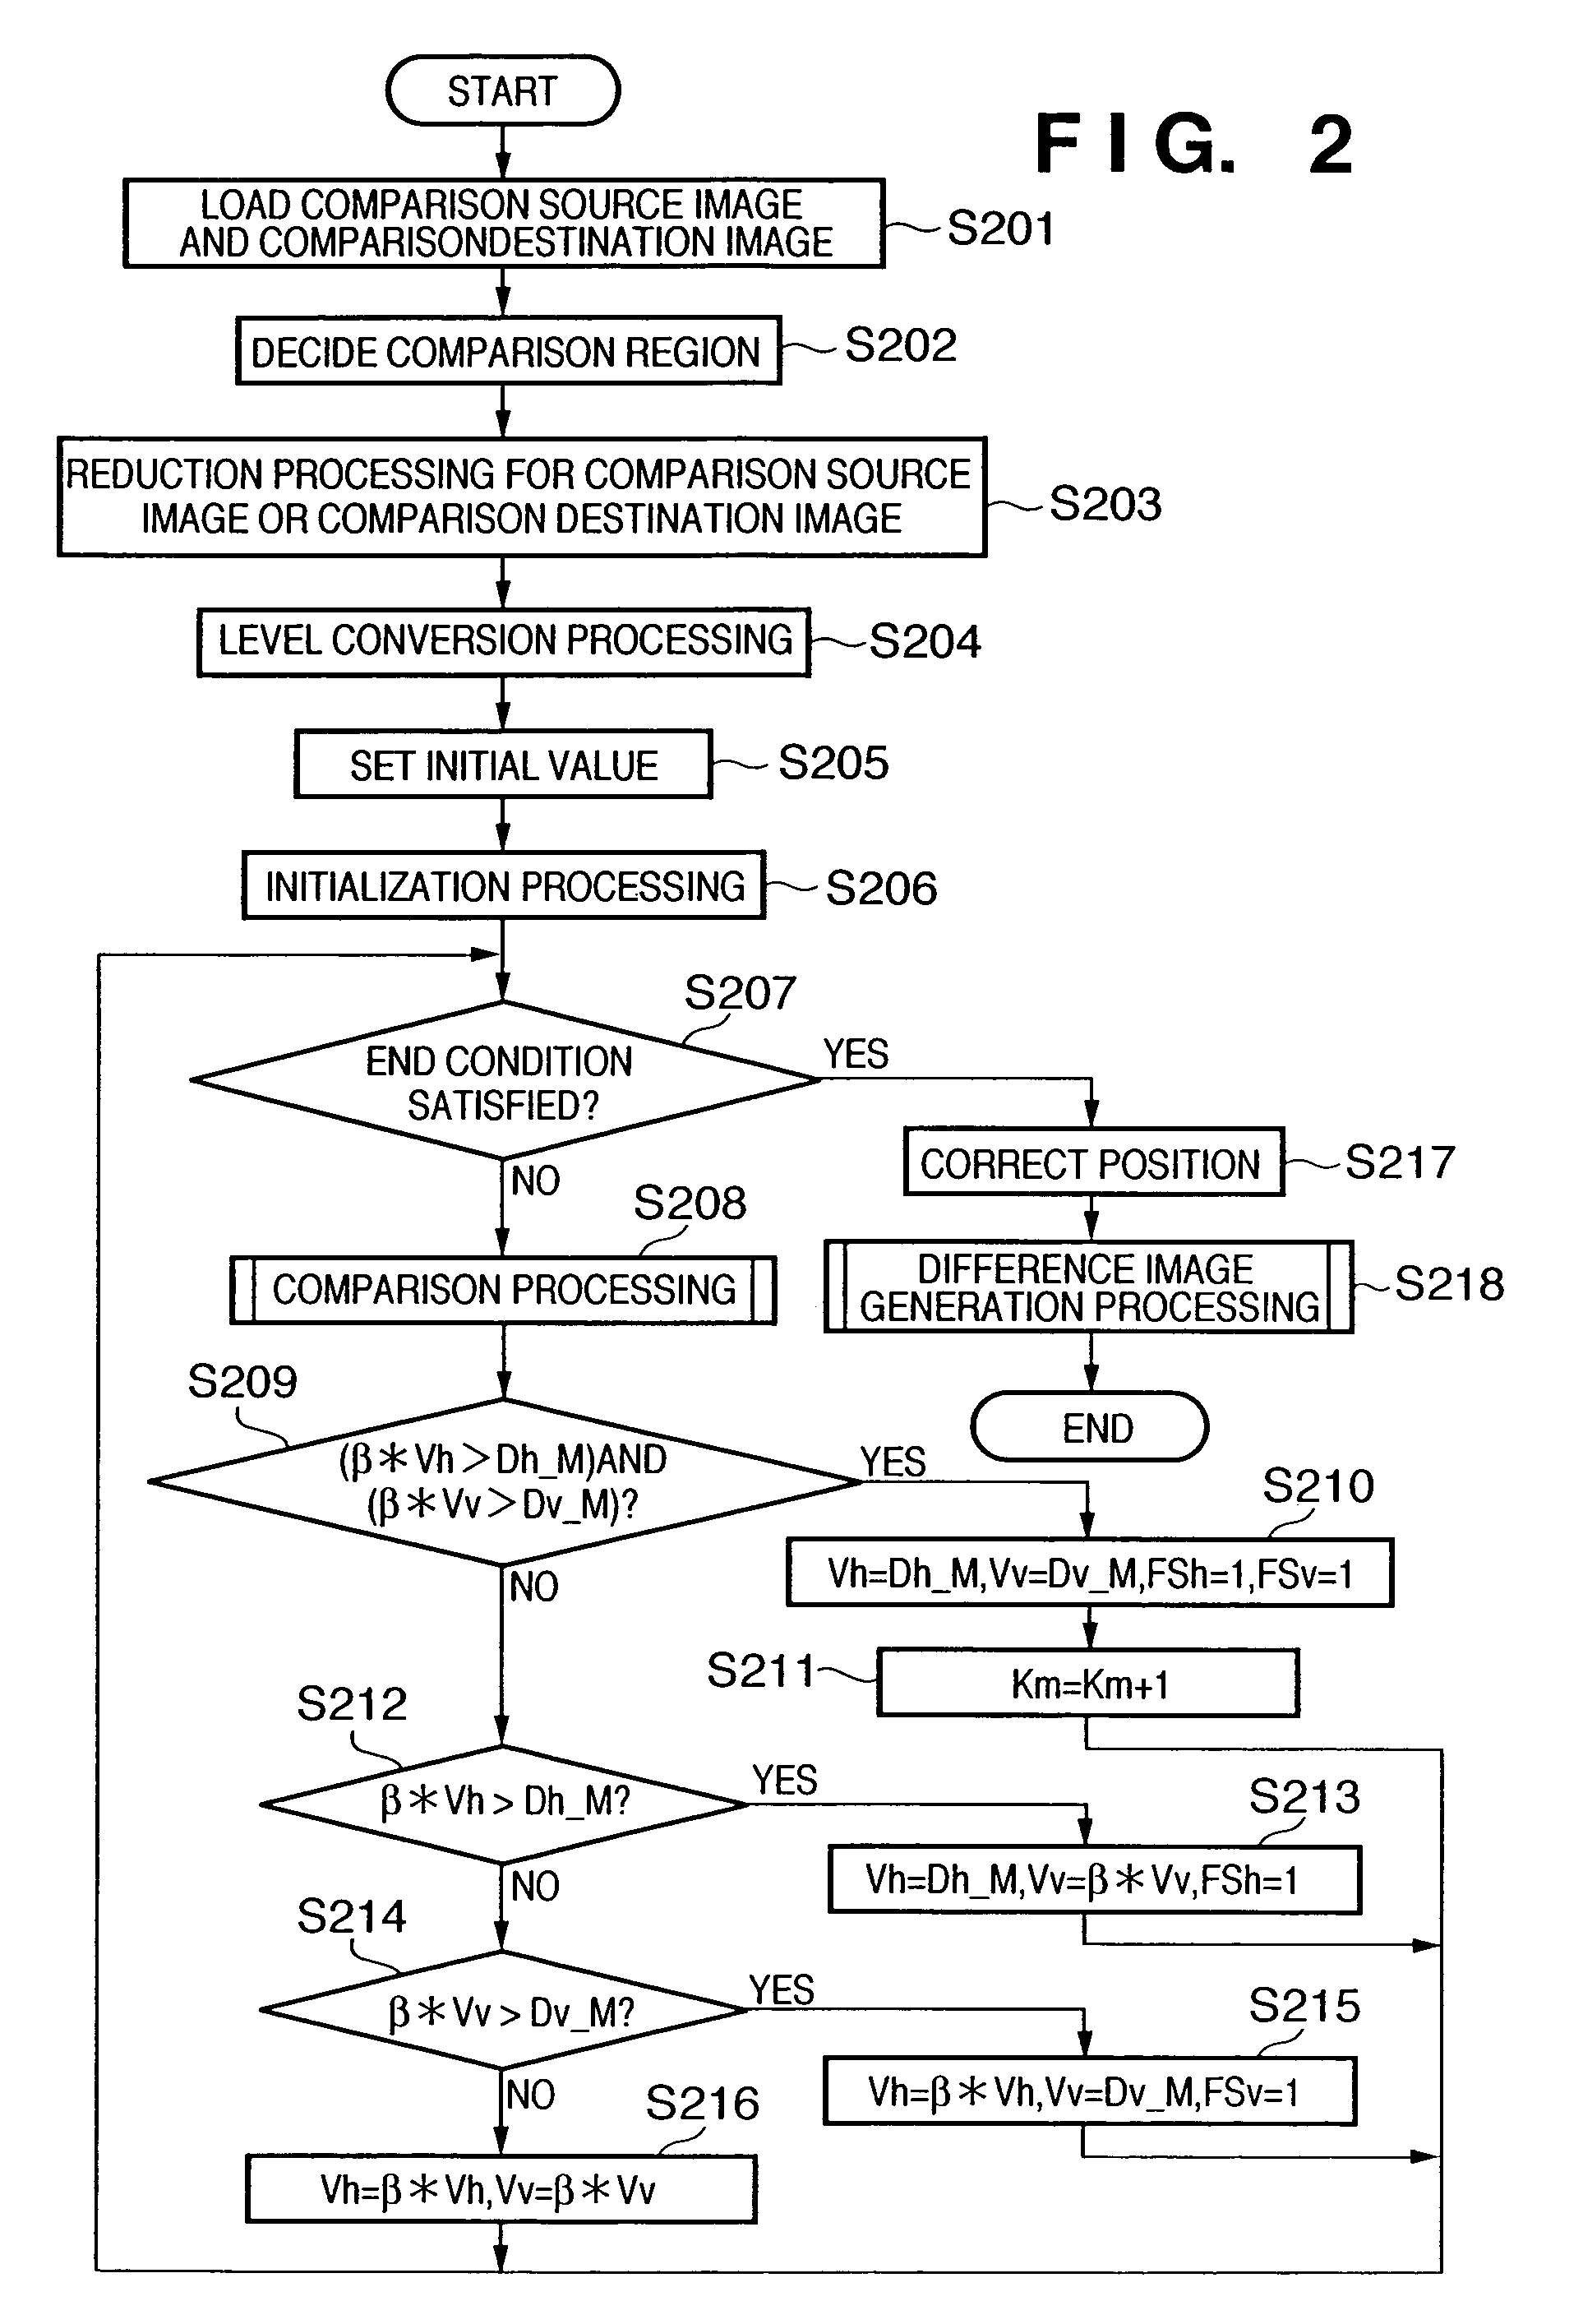 Image processing apparatus, method therefor, and program